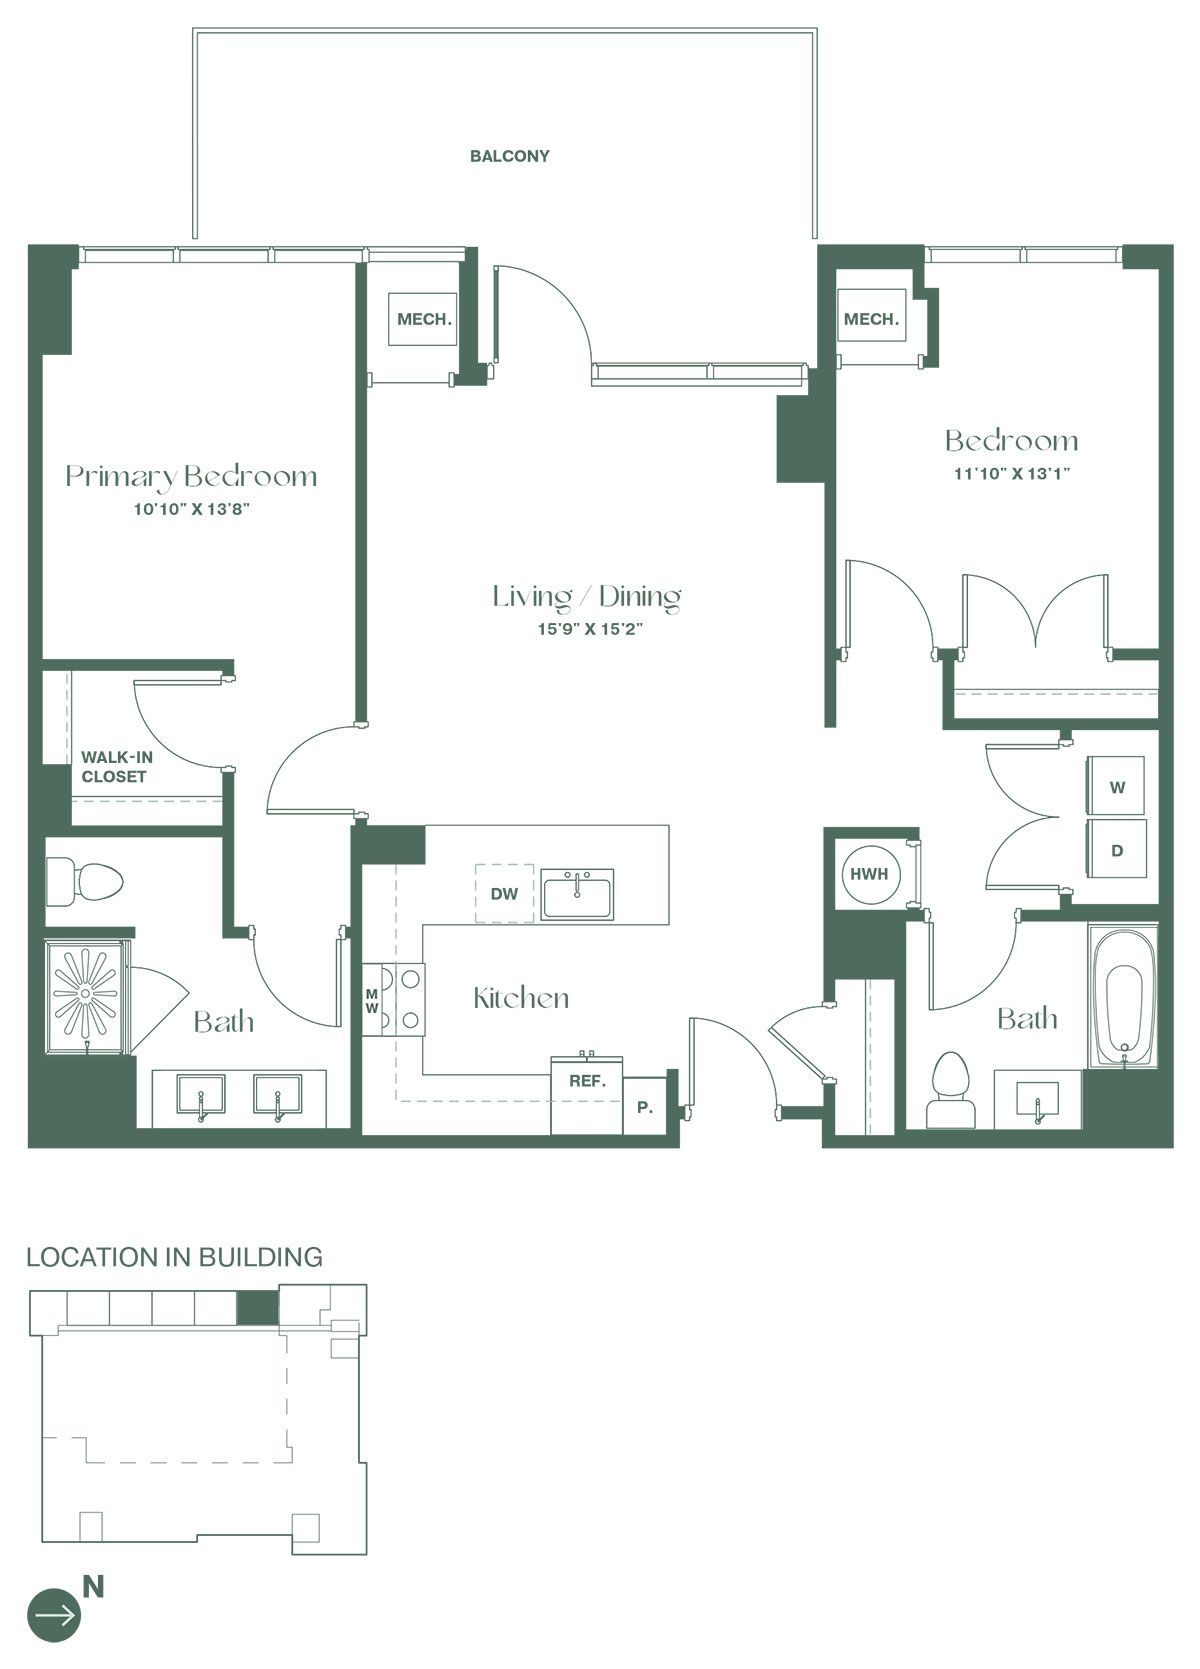 This floorplan for a two bedroom, two bathroom apartment at RVR at Xchange opens up into a fully equipped kitchen with a dishwasher and pantry. Past the kitchen is a living and dining area with a spacious balcony, the living and dining room and a bedroom with a closet. To the left of is the entrance to the primary bedroom suite, with a large walk-in closet and a full bathroom.